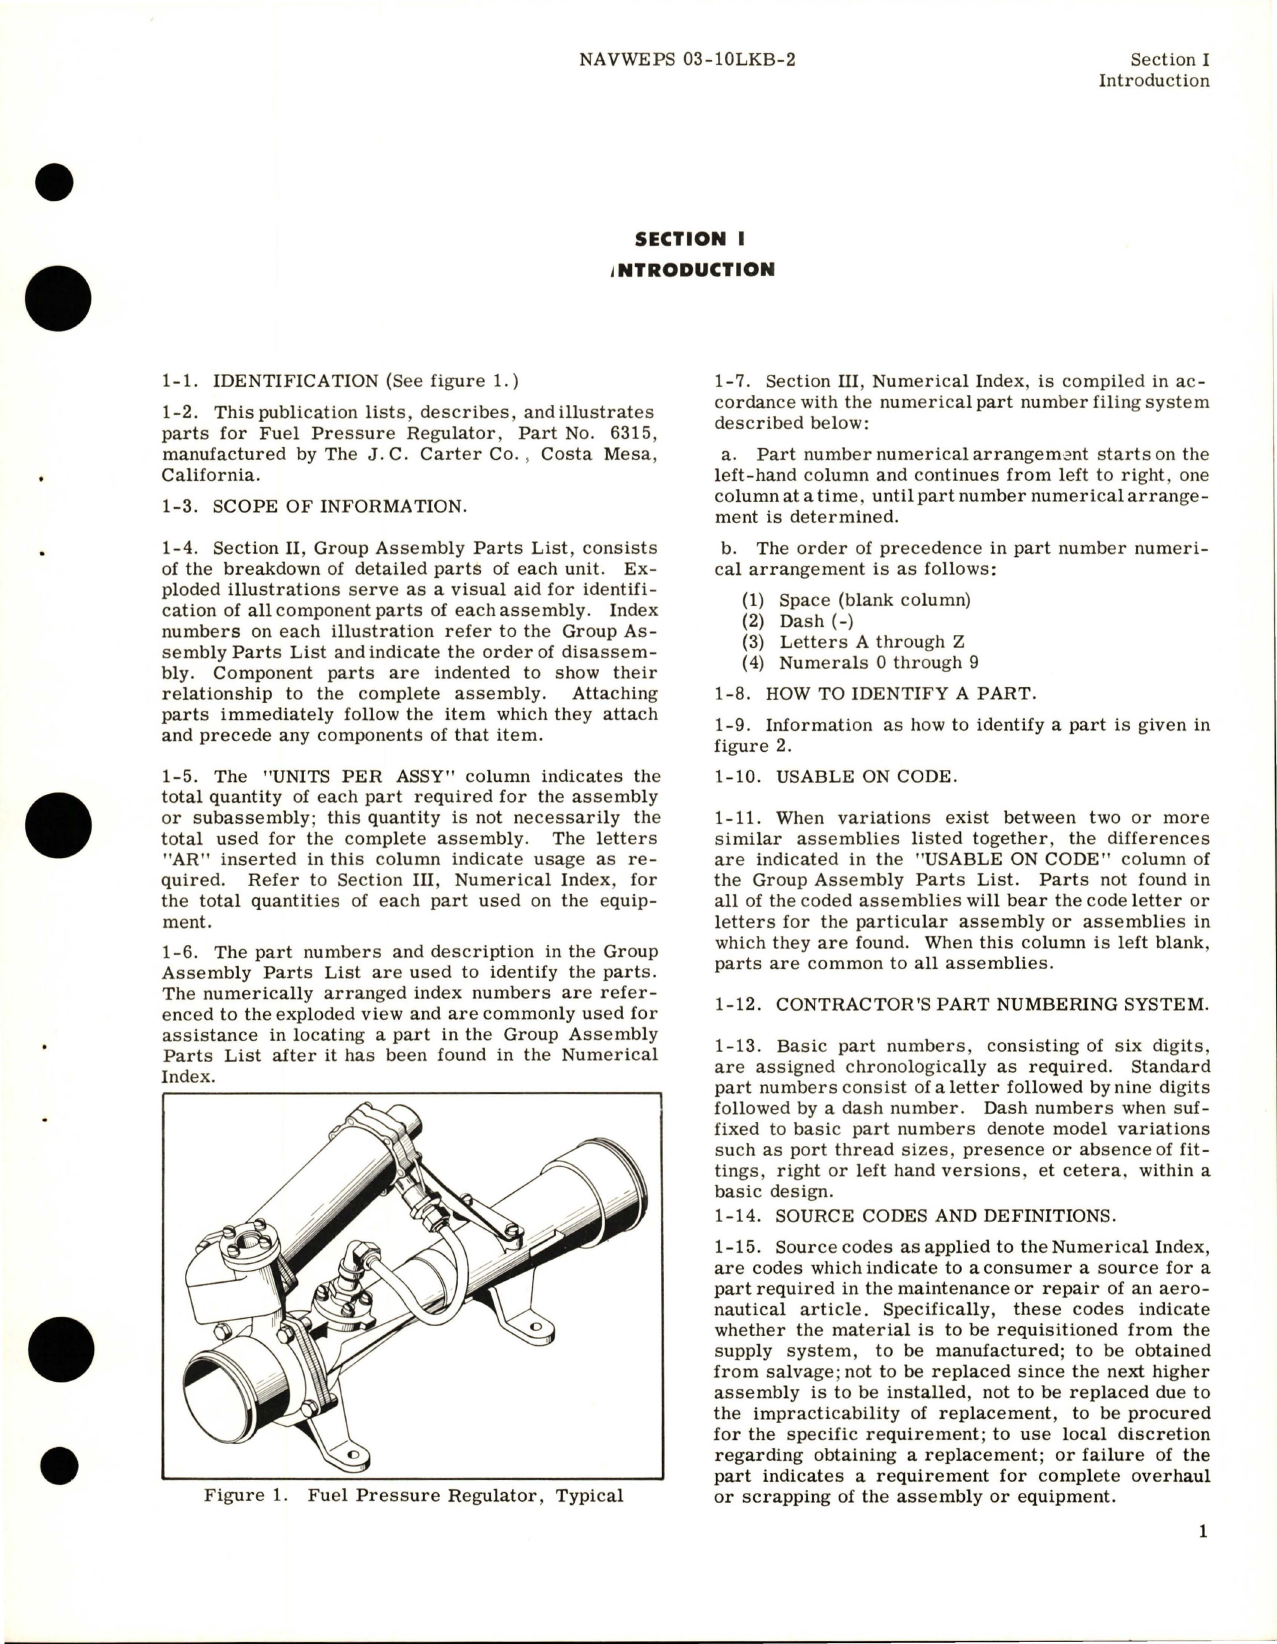 Sample page 5 from AirCorps Library document: Illustrated Parts Breakdown for Fuel Pressure Regulator - Part 6315